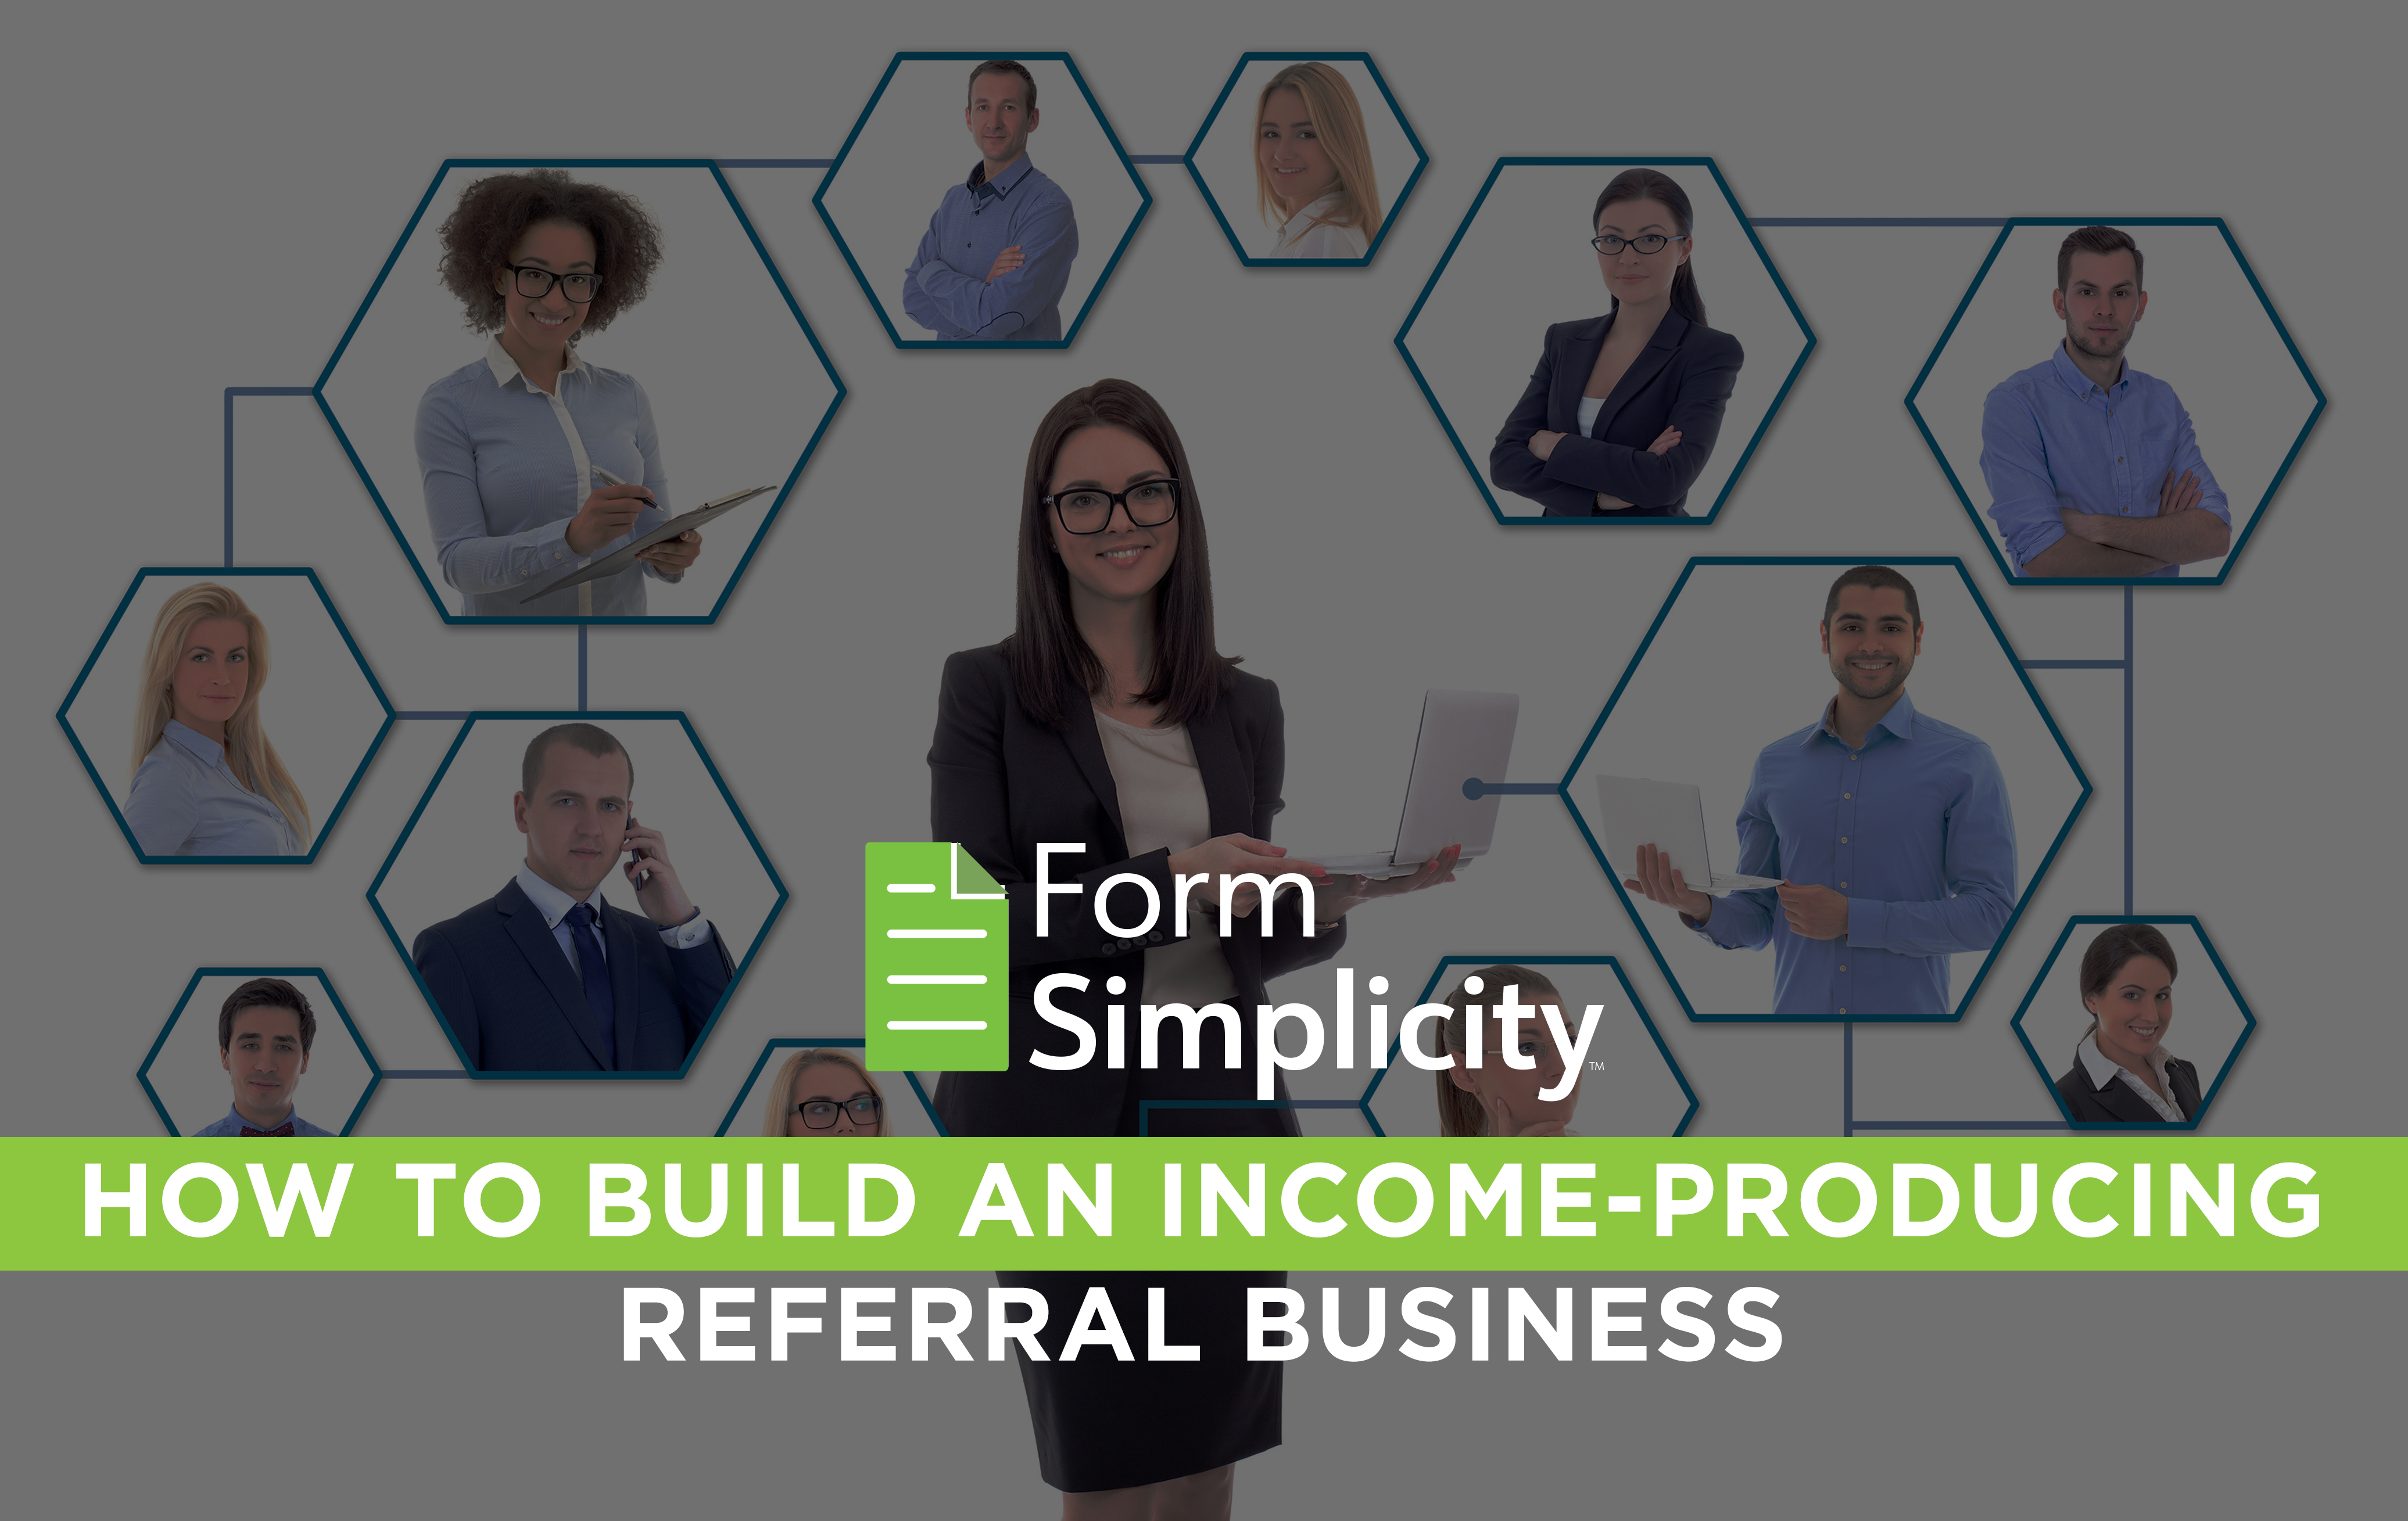 How to Build an Income-Producing Referral Business Image